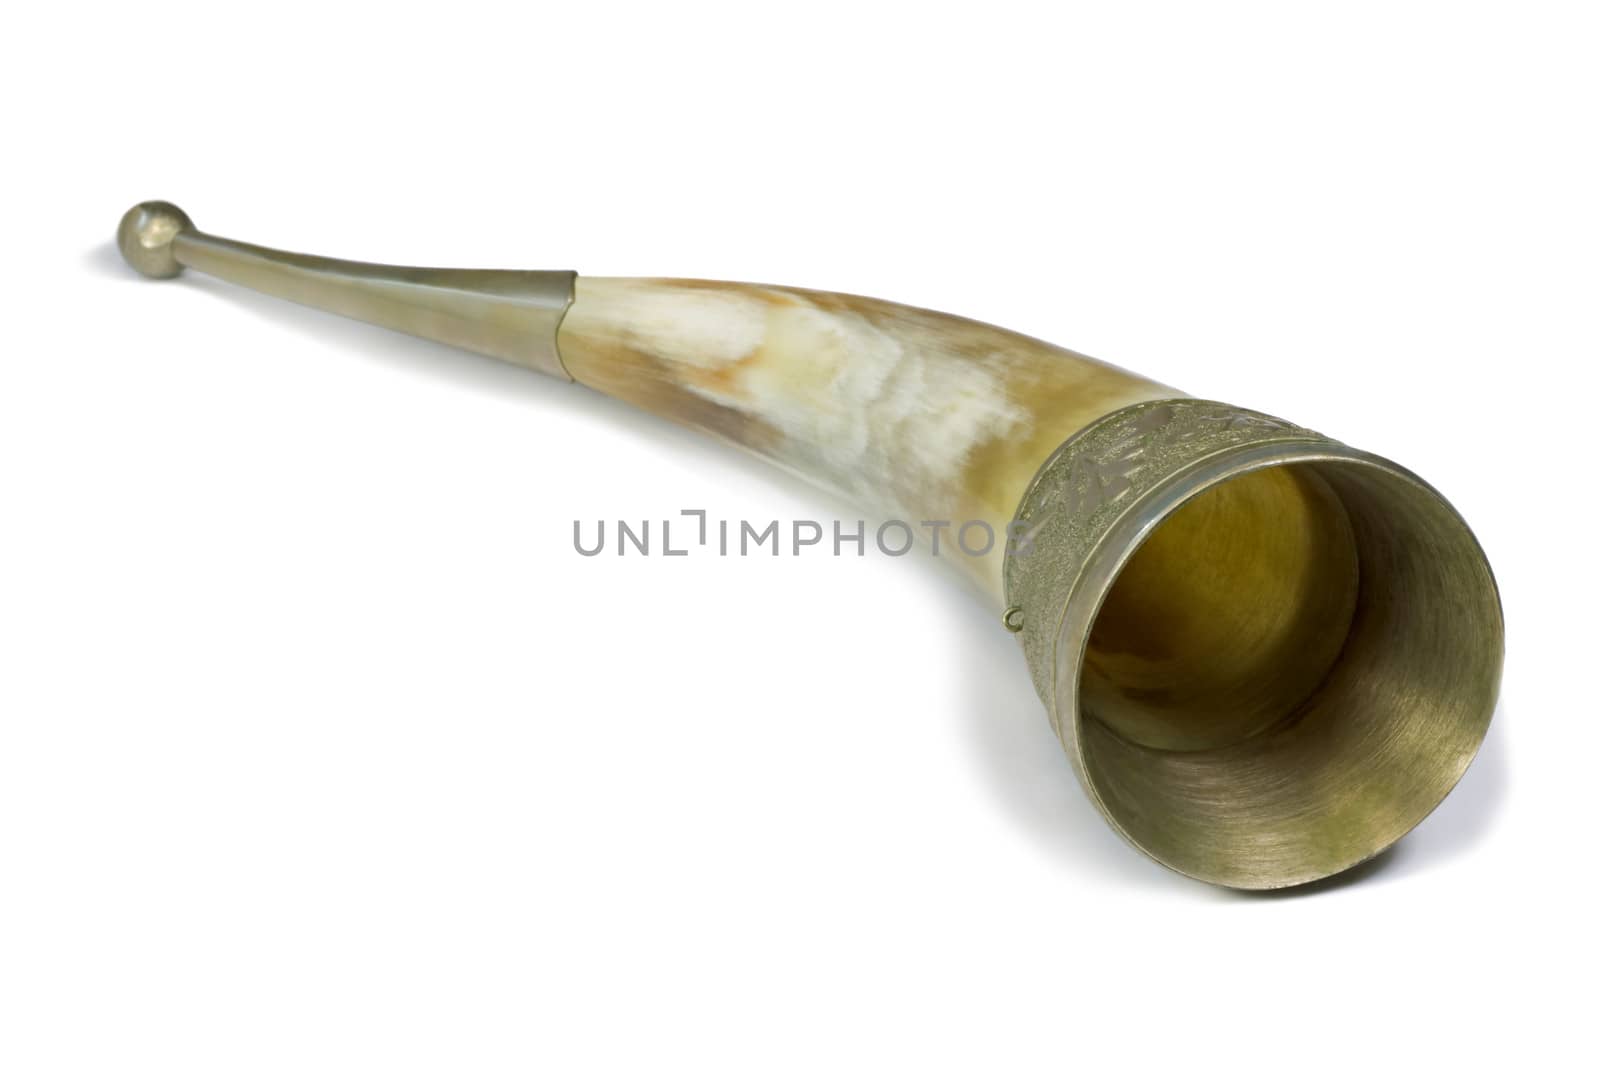 Made from animal horns and decorated with engraving on metal, wine vessel. Presented on a white background.